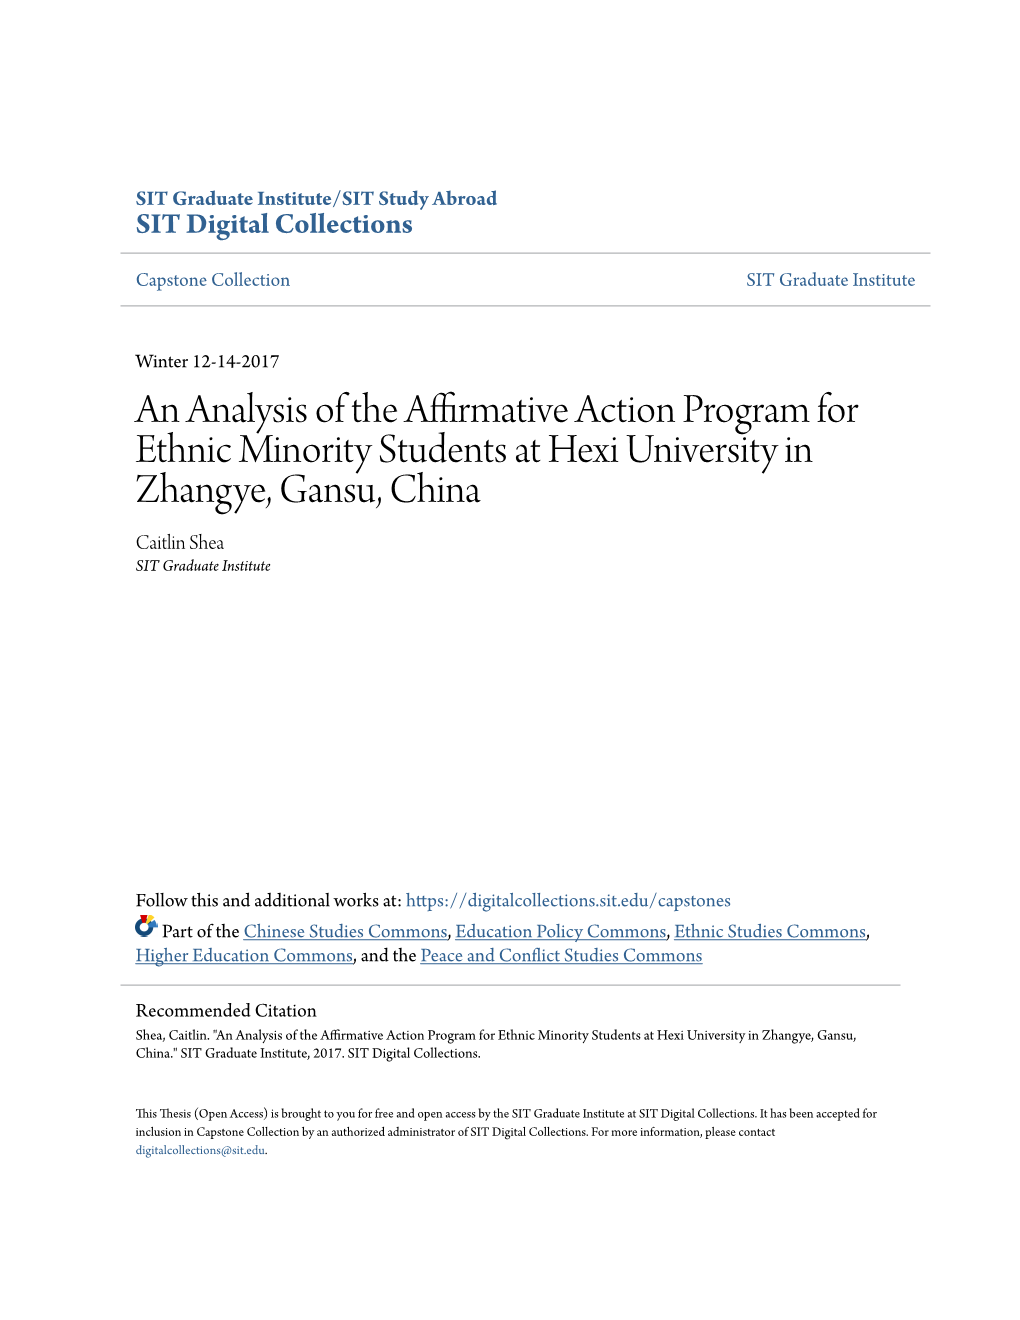 An Analysis of the Affirmative Action Program for Ethnic Minority Students at Hexi University in Zhangye, Gansu, China Caitlin Shea SIT Graduate Institute